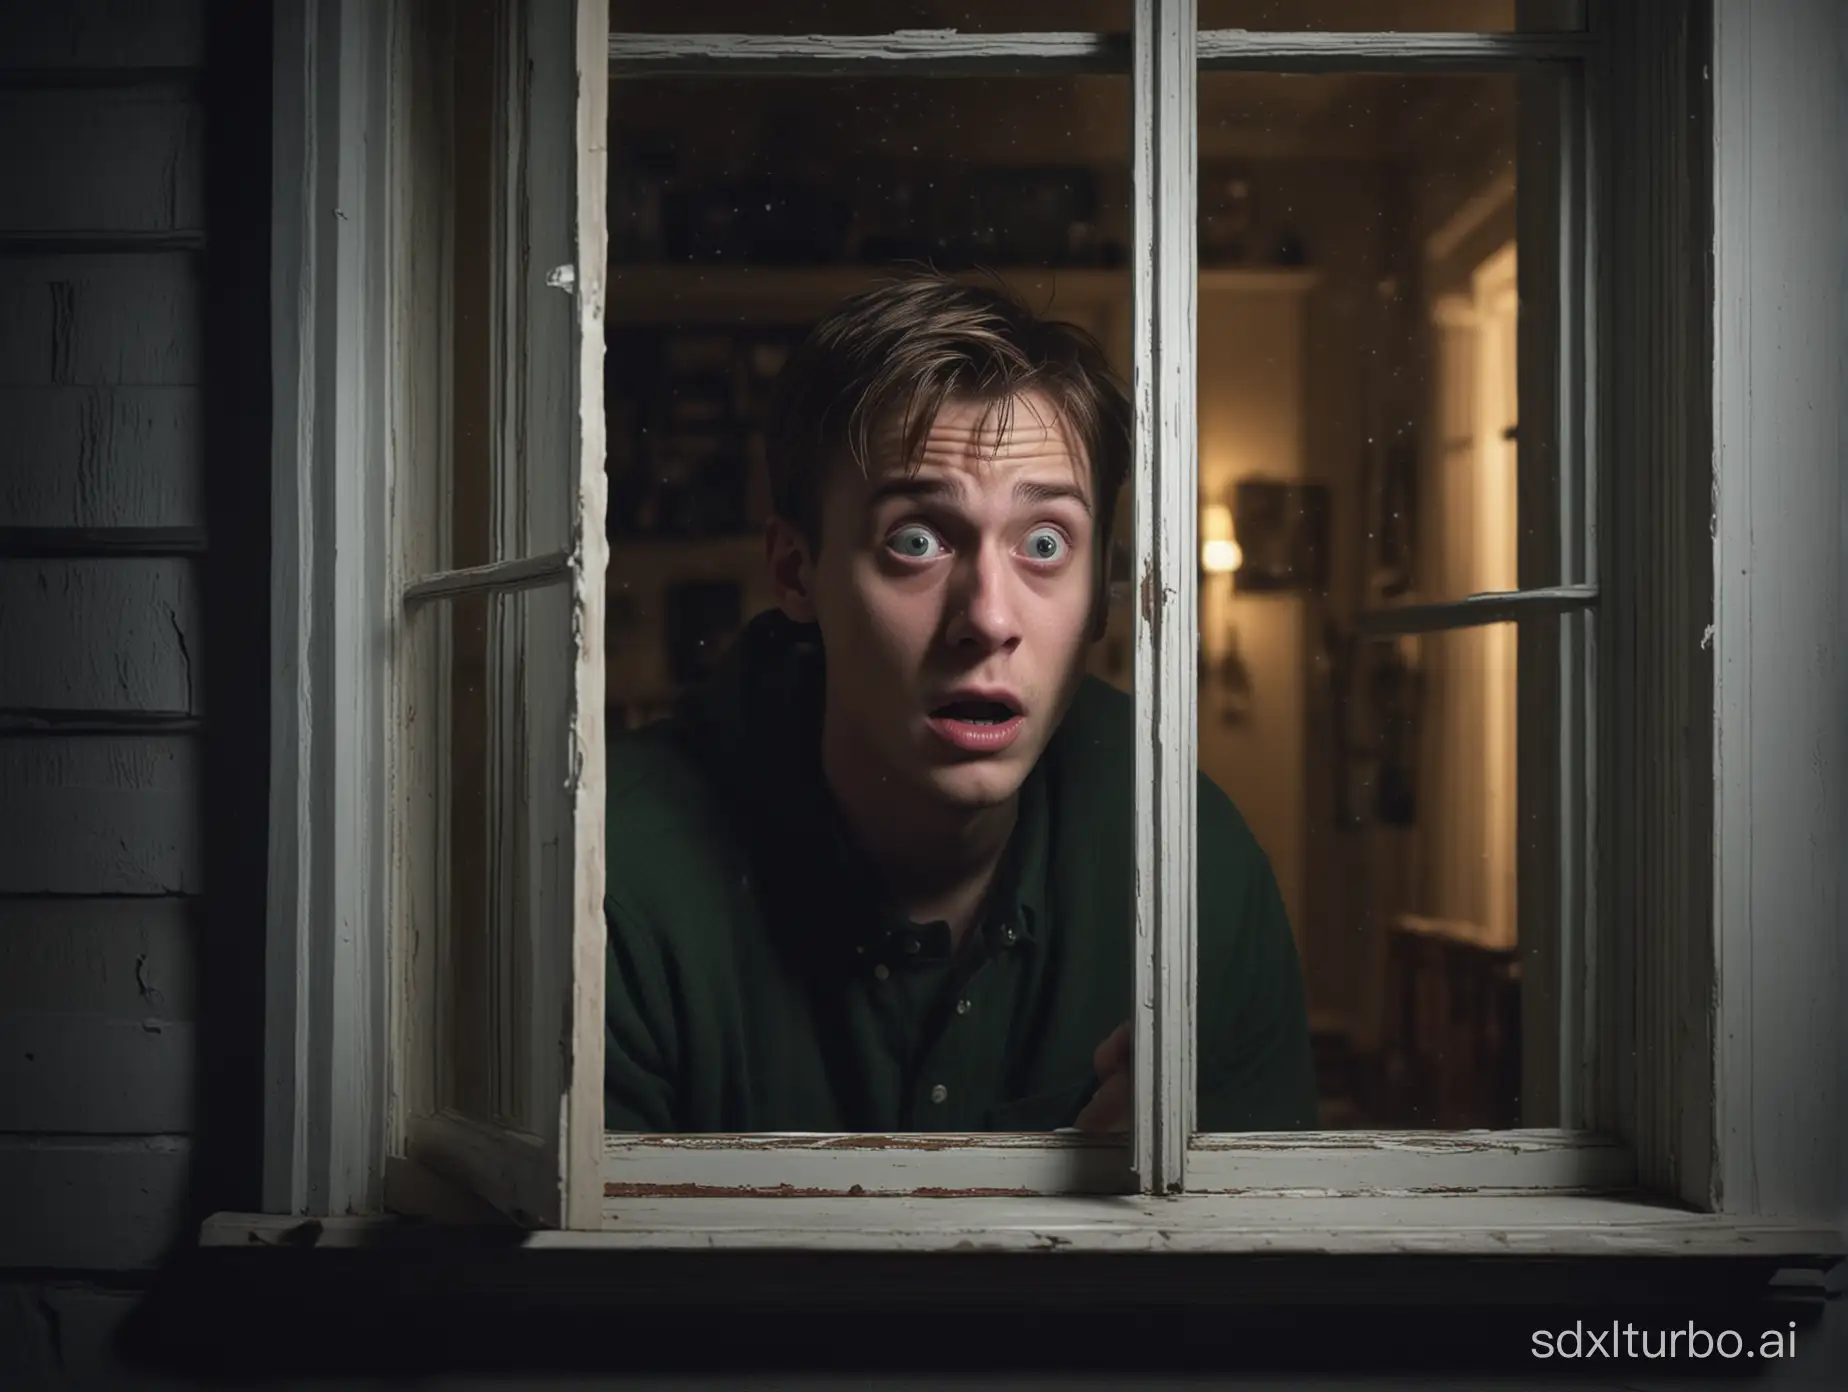 Create a high resolution, 16:9 aspect ratio, scary image about "true home alone horror stories"? The image must be photorealistic, colorful, mysterious, night lights, one scared young man watching through window, atmospheric, catchy, must pop and catch attention.